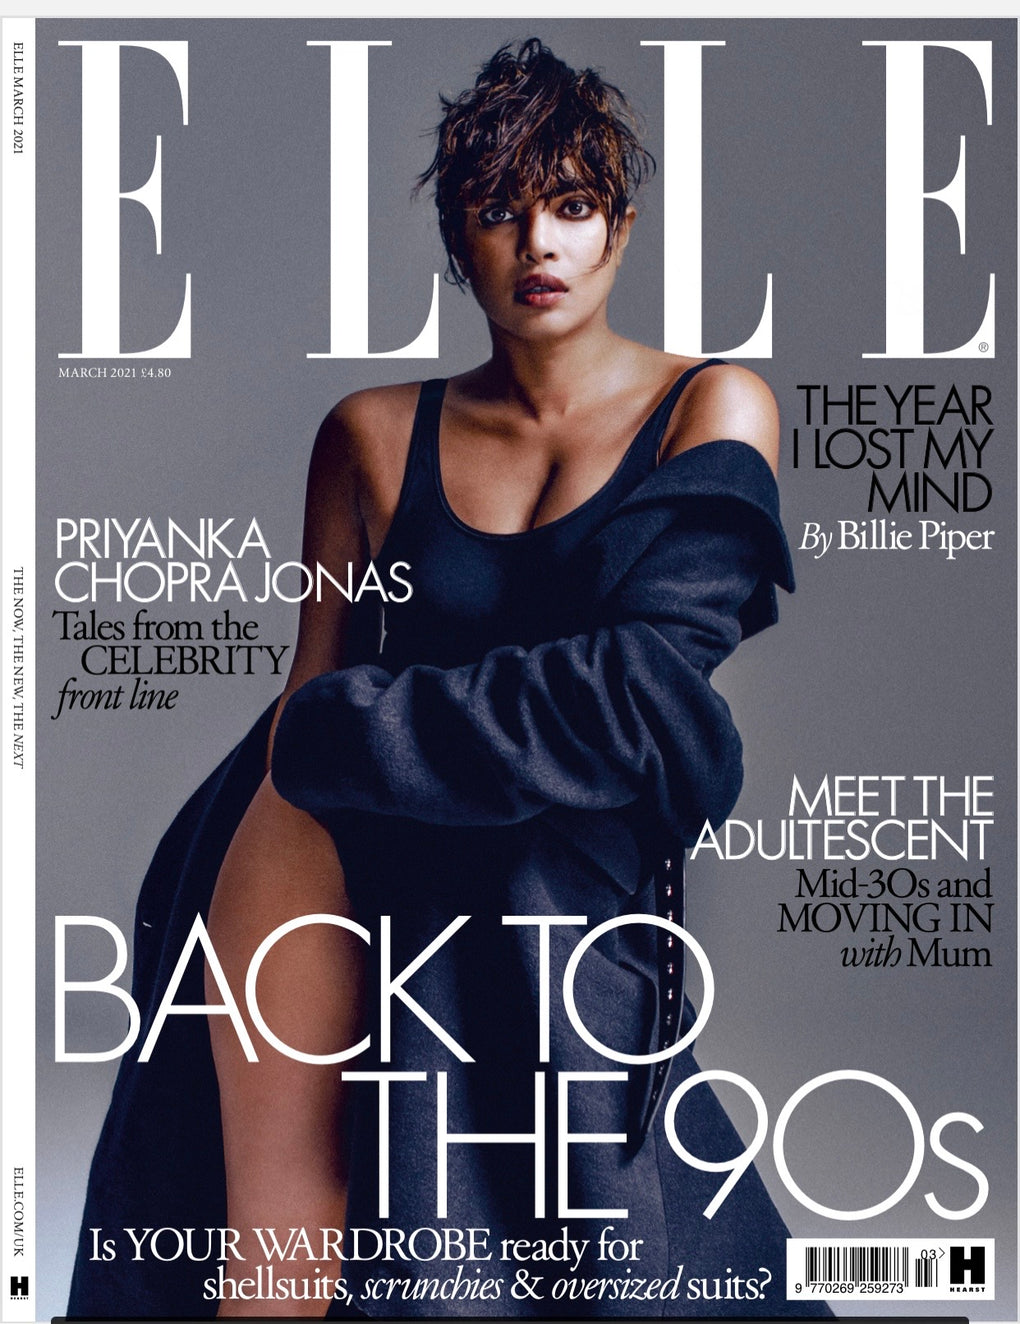 miracles & more British Elle Beauty edit featured March 2021